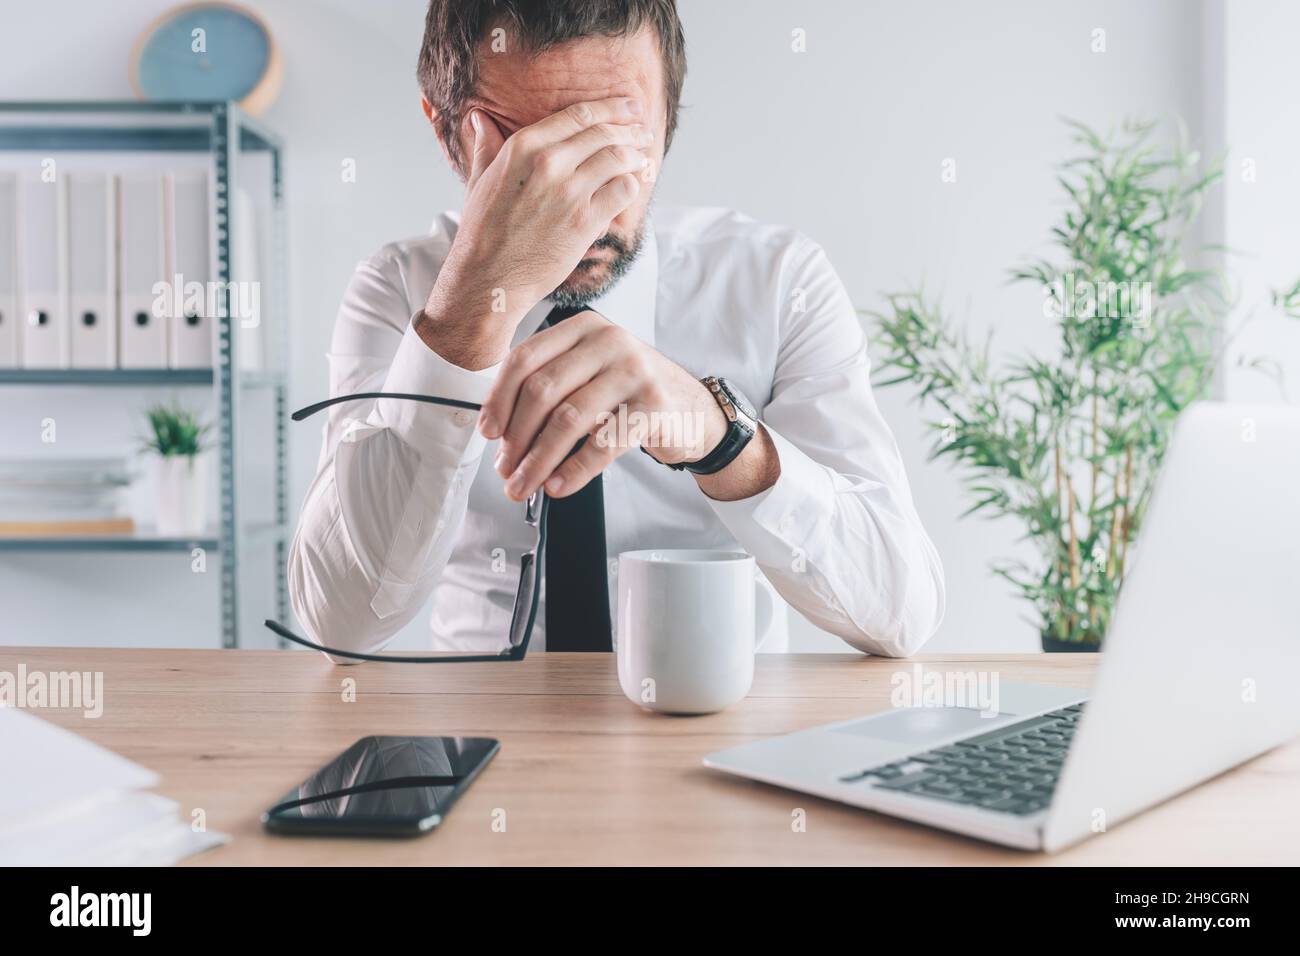 Businessman and entrepreneur realizing the big mistake he made, hand covering face in disbelief, selective focus Stock Photo